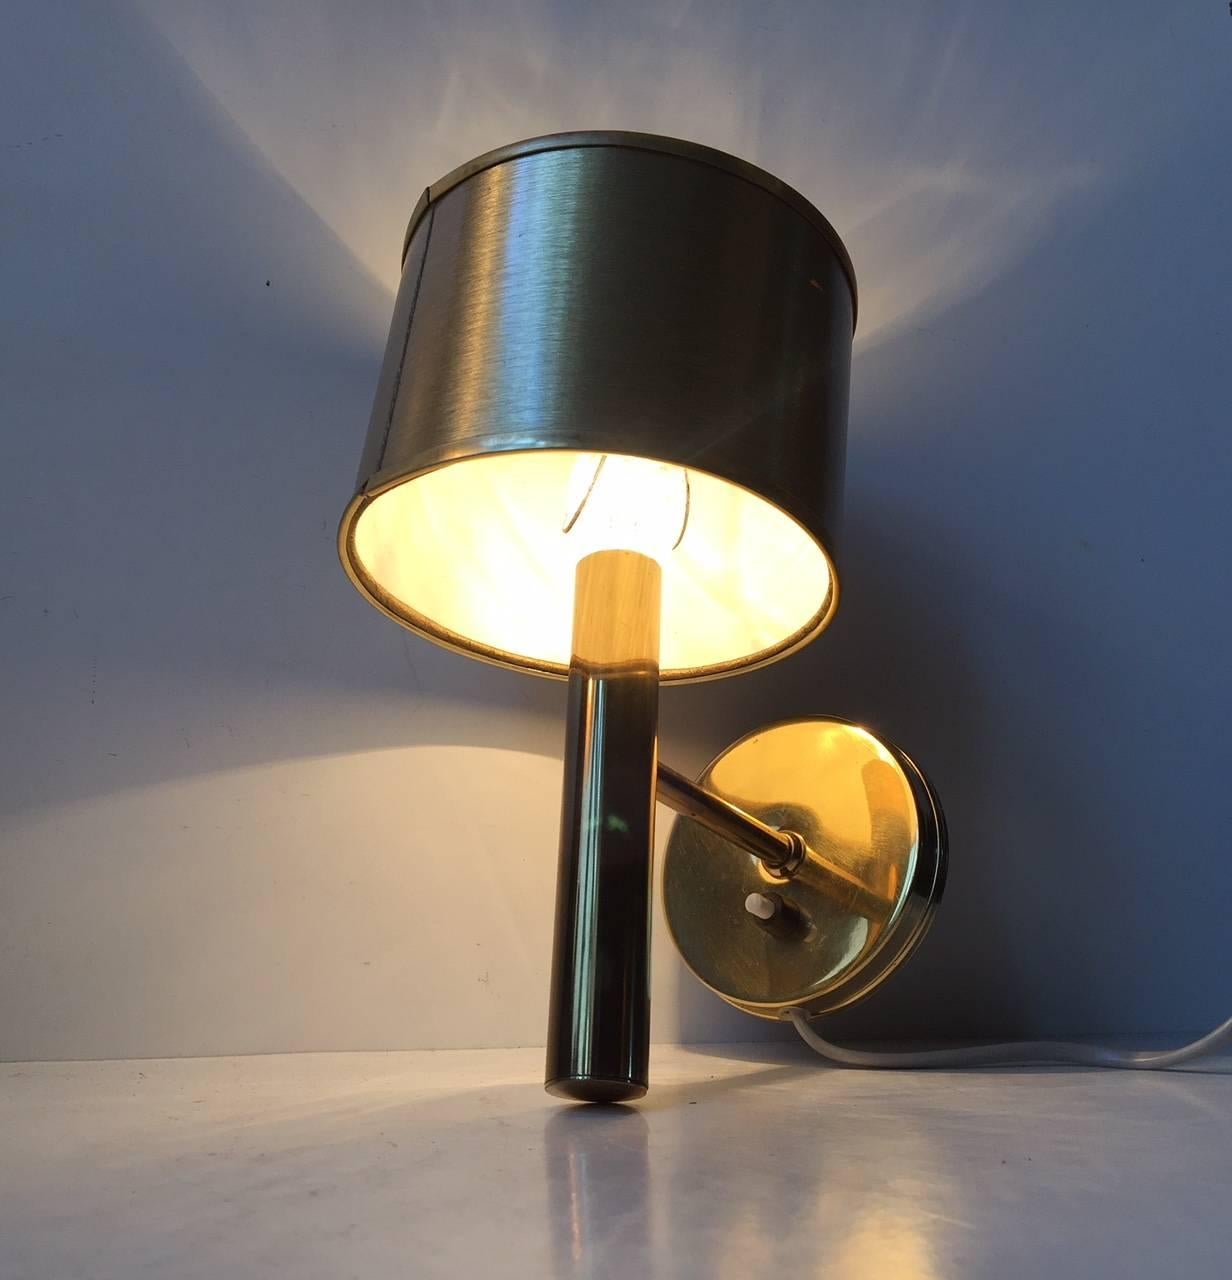 Fixed wall light designed and manufactured by Svend Mejlstrøm in Denmark during the 1960s. Its made from polished brass and has its gold-colored textile shade that came with it originally.